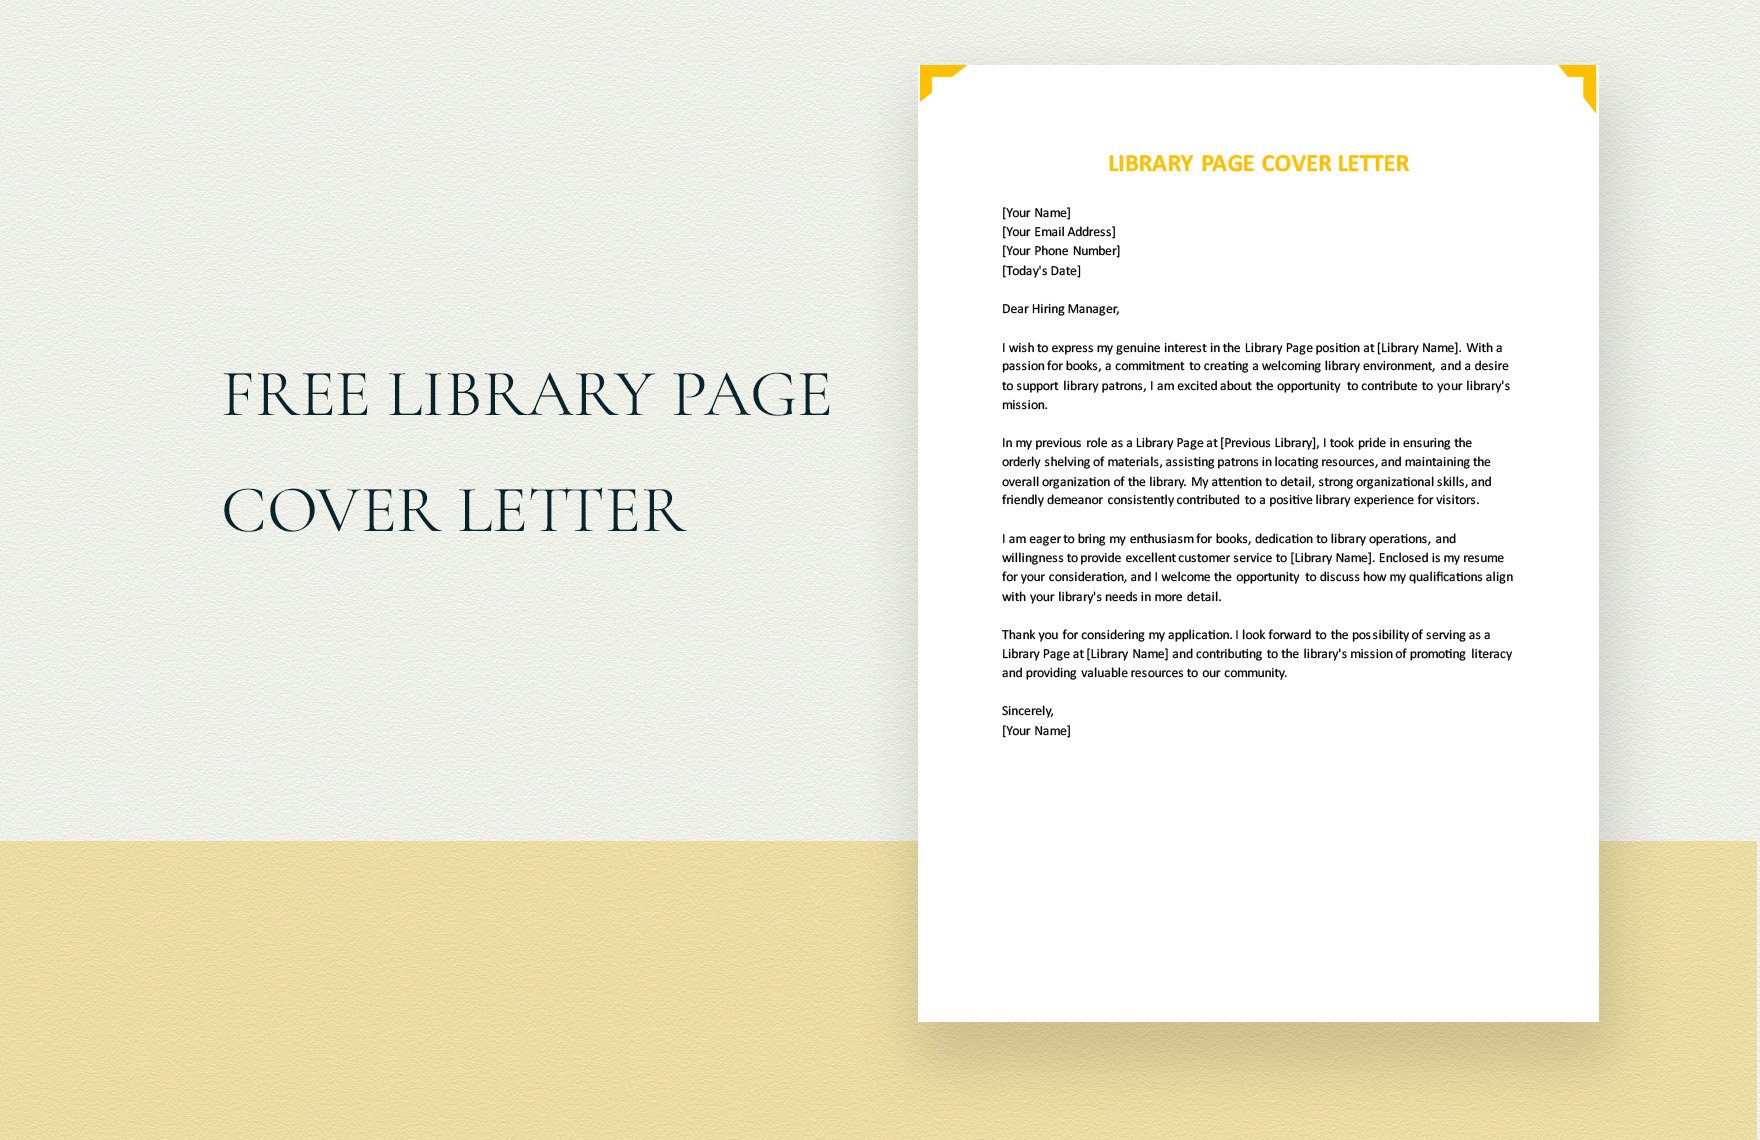 Free Library Page Cover Letter